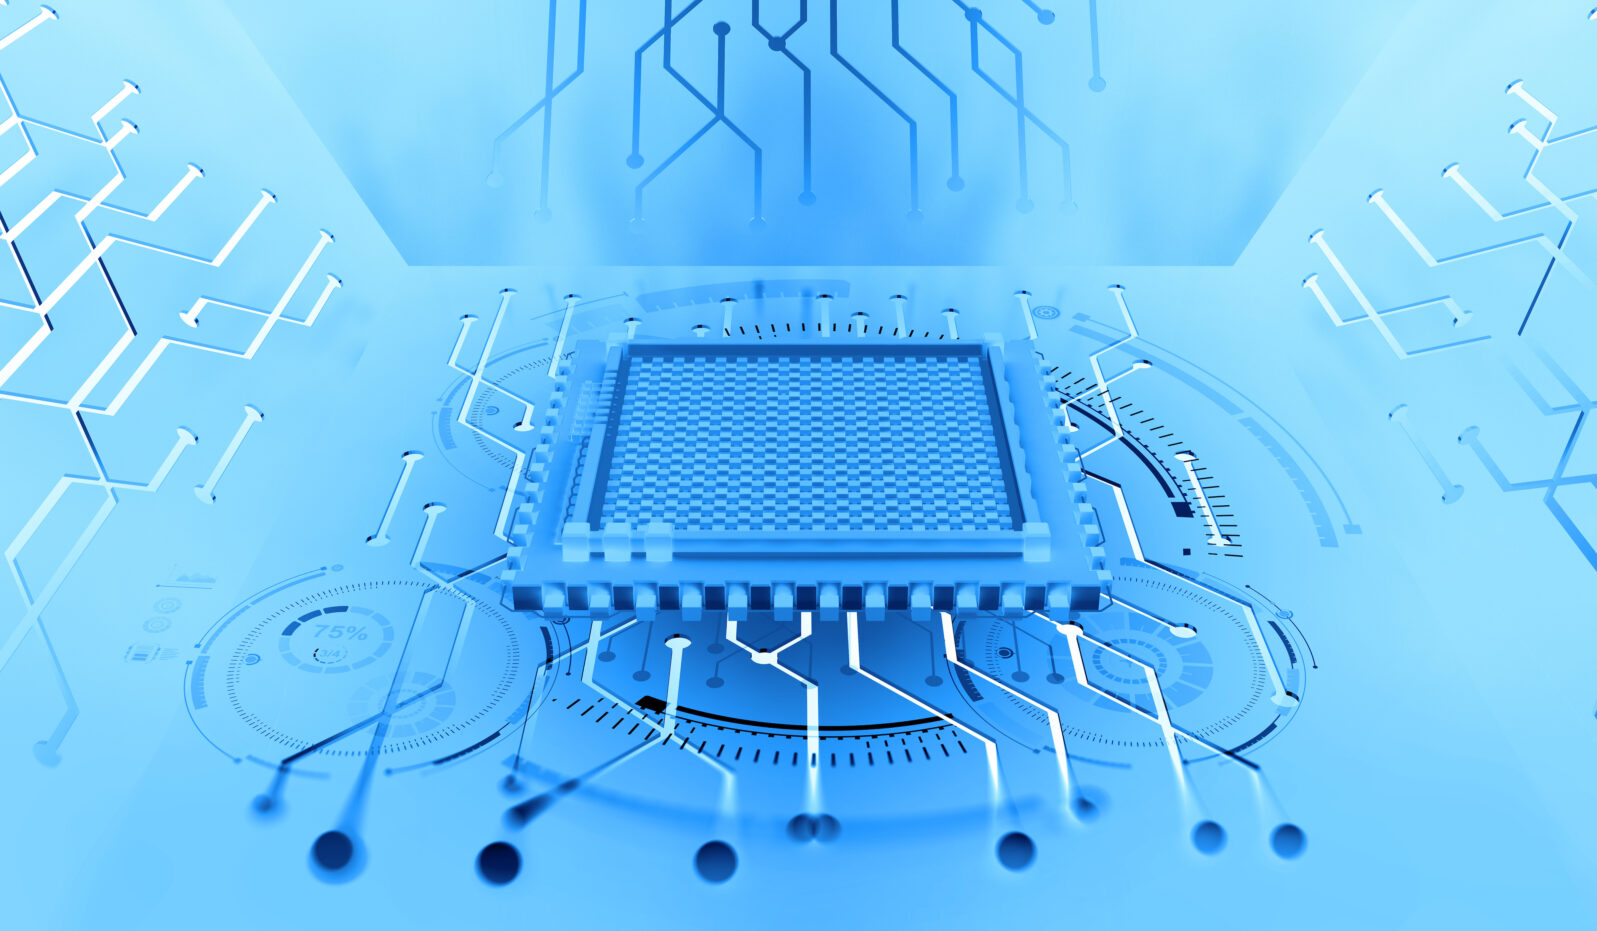 Processor of the future. Concept of global cyberspace. Innovations in computer nanotechnology. 3D illustration of an abstract microchip